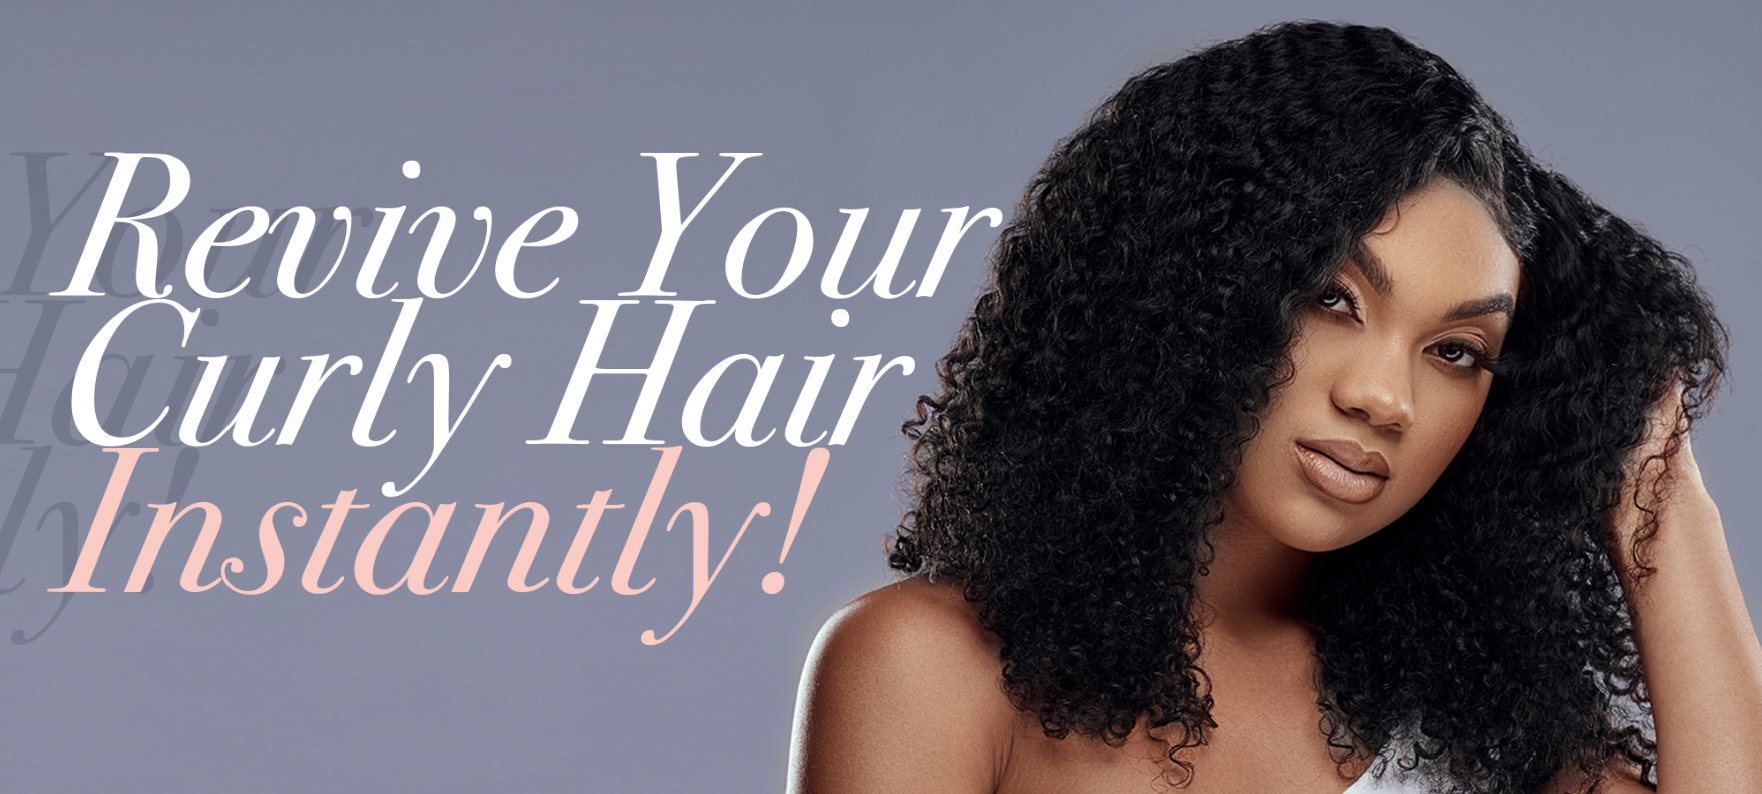 Revive Your Curly Hair Instantly!